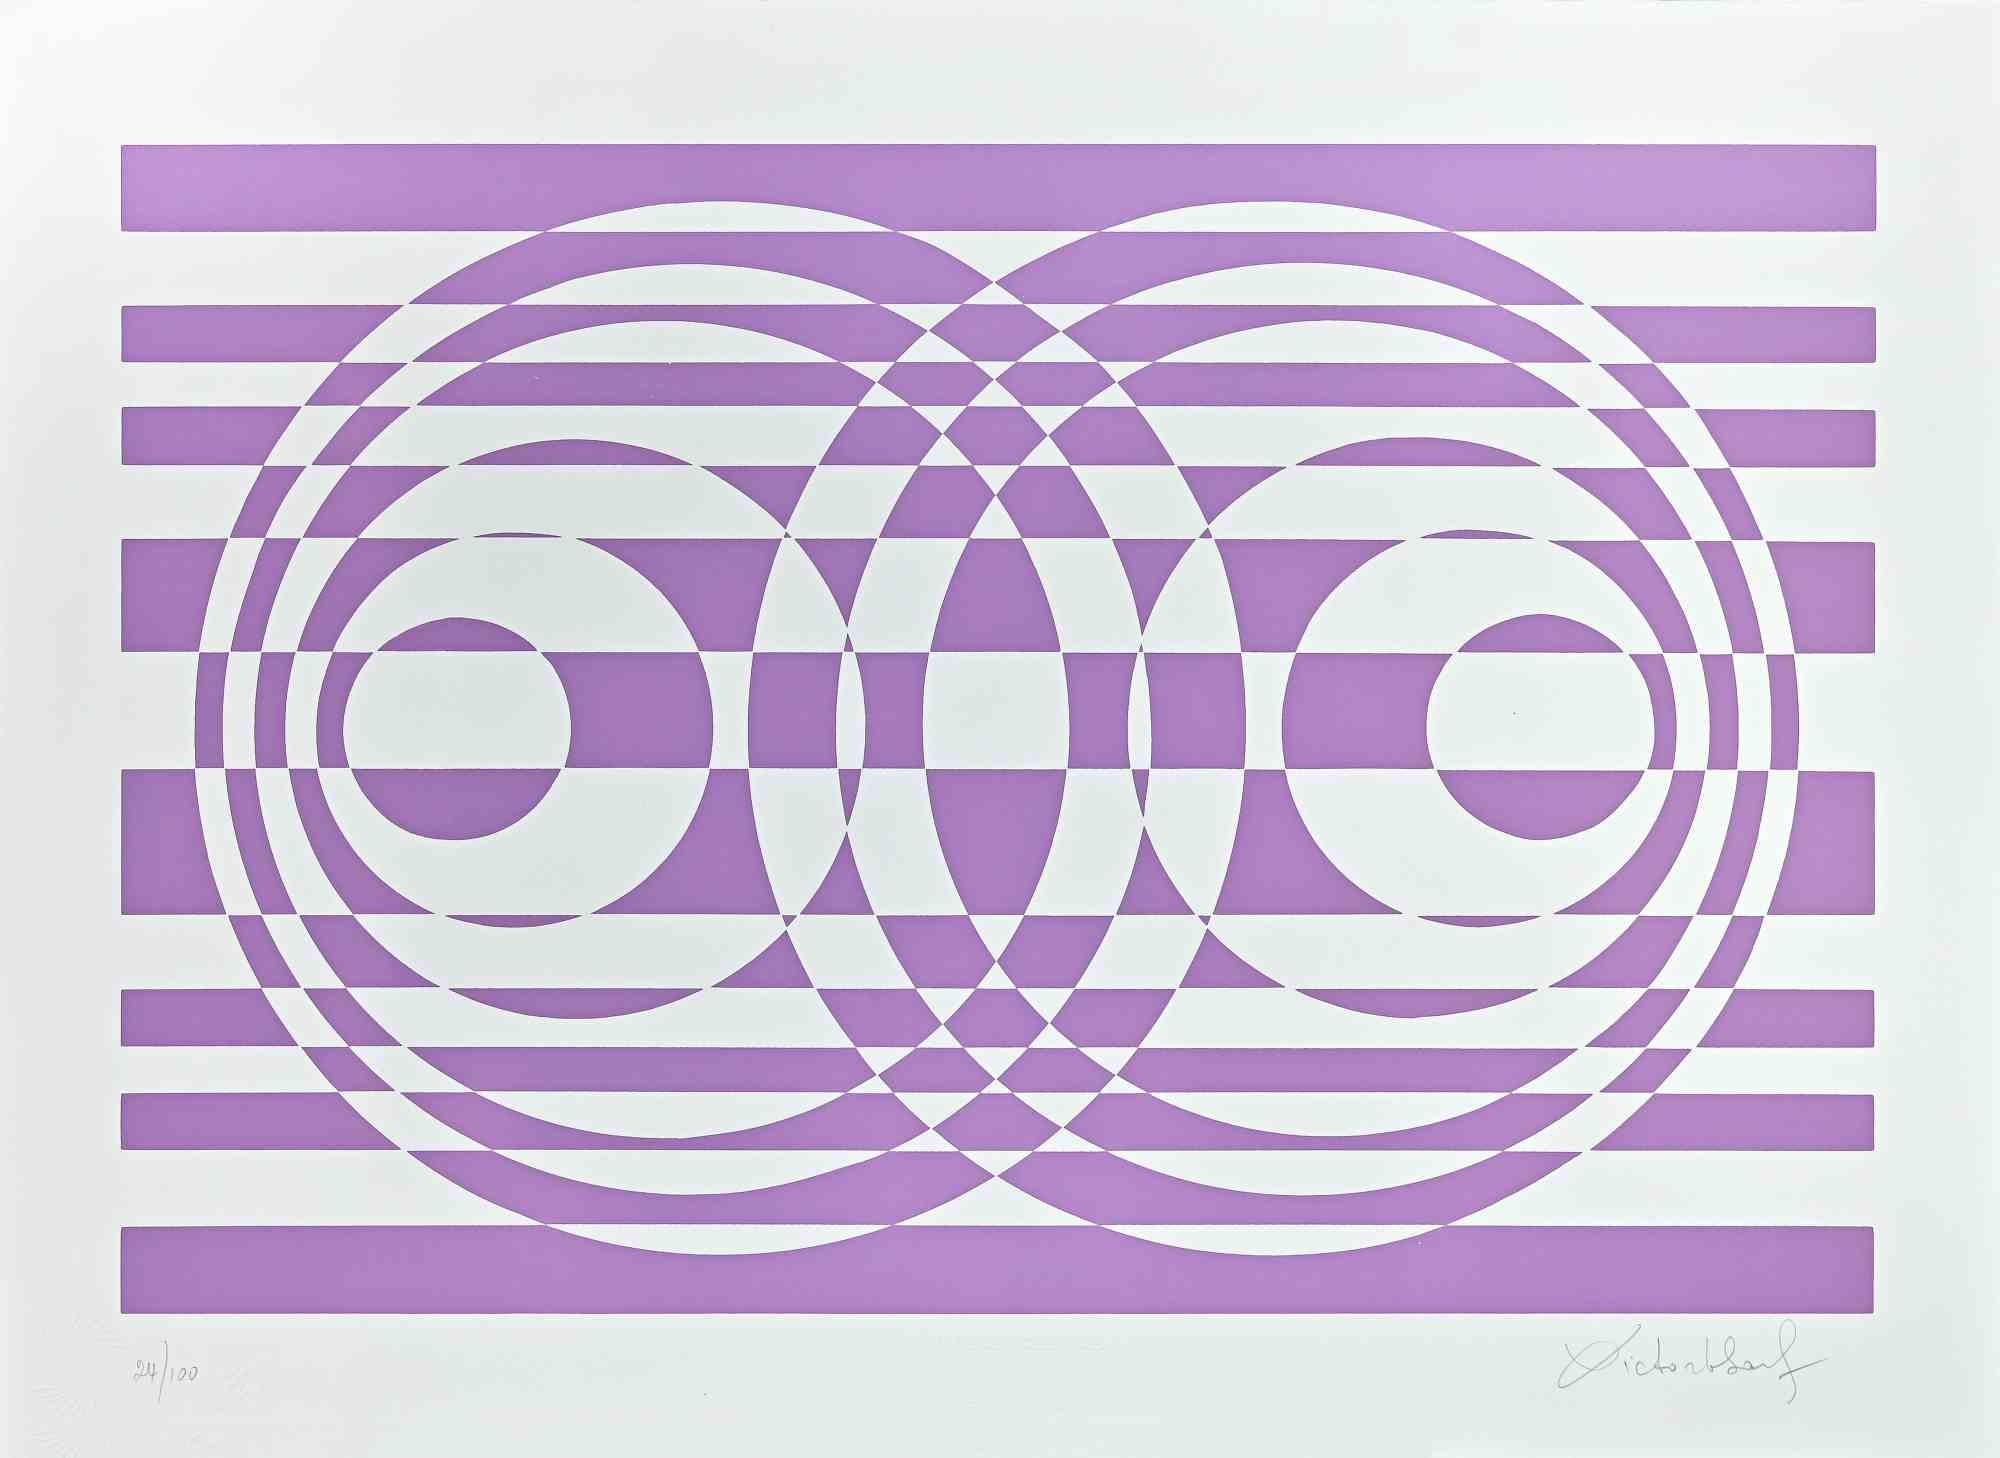 Victor Debach Abstract Print - Abstract Composition in Purple - Screen Print by V. Debach - 1970s